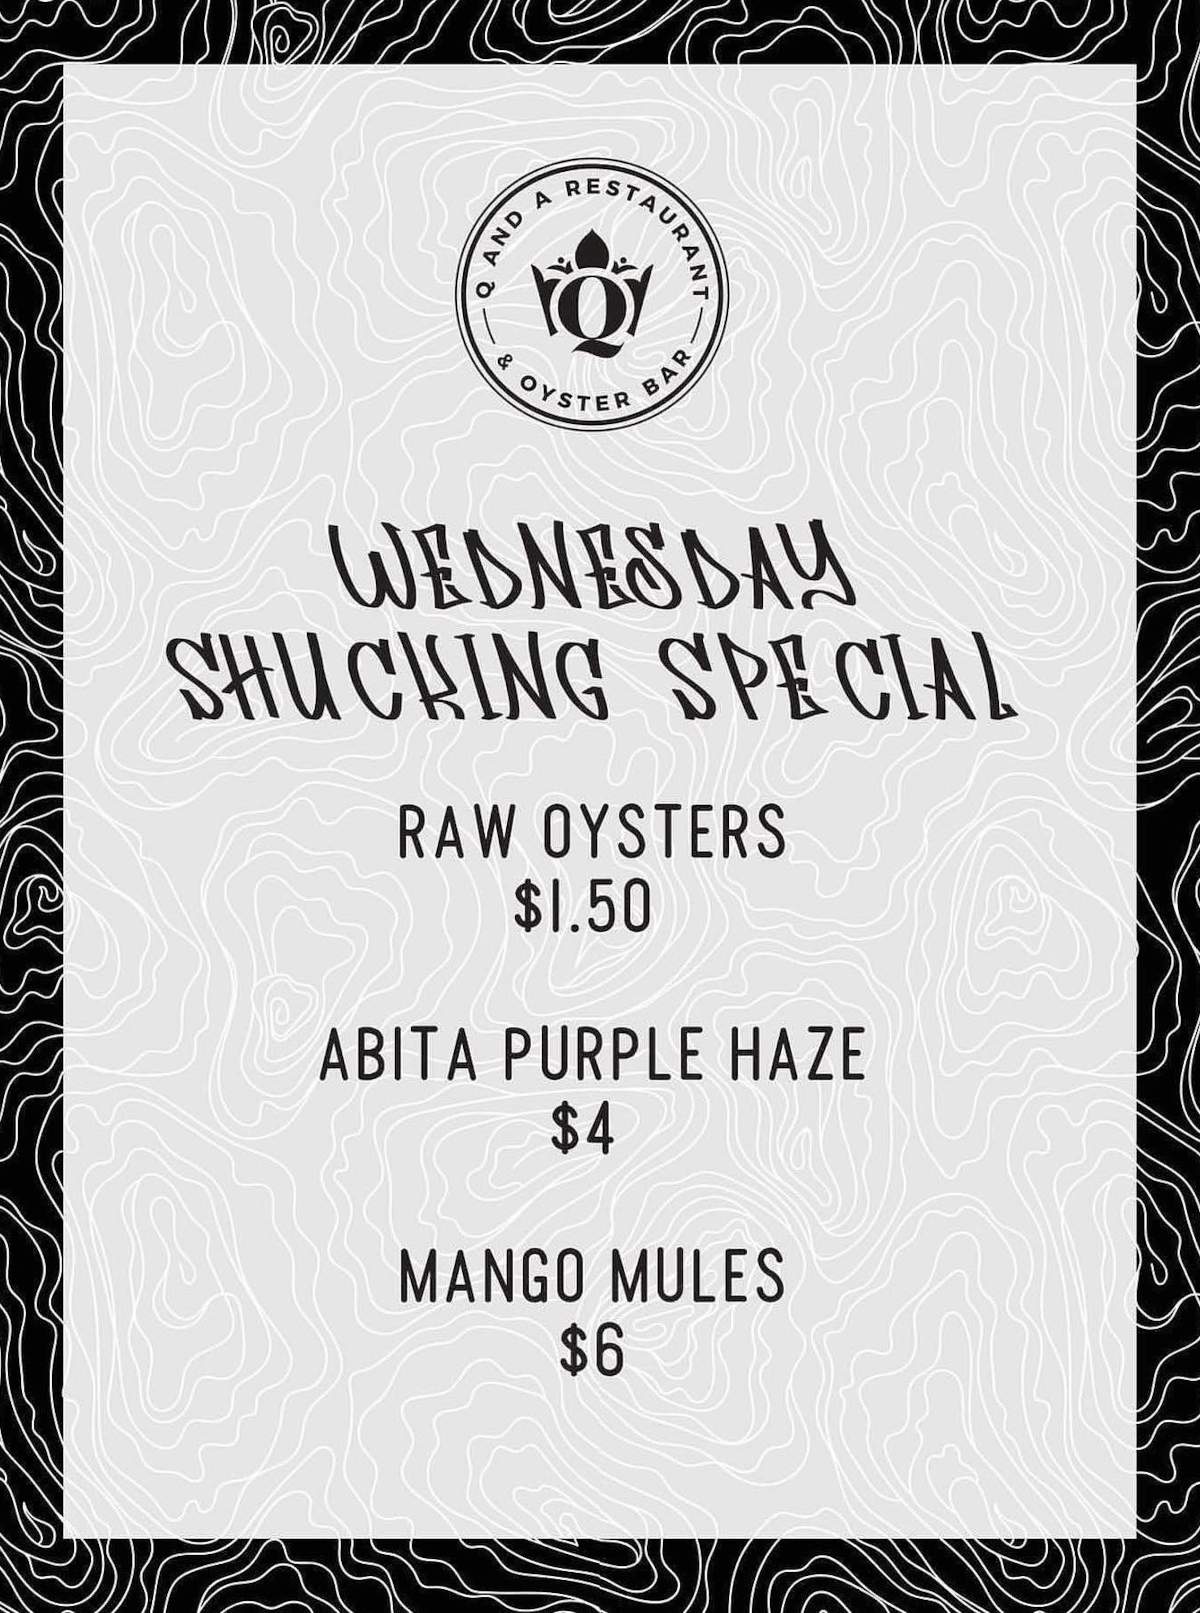 Wednesday Shucking Special flyer